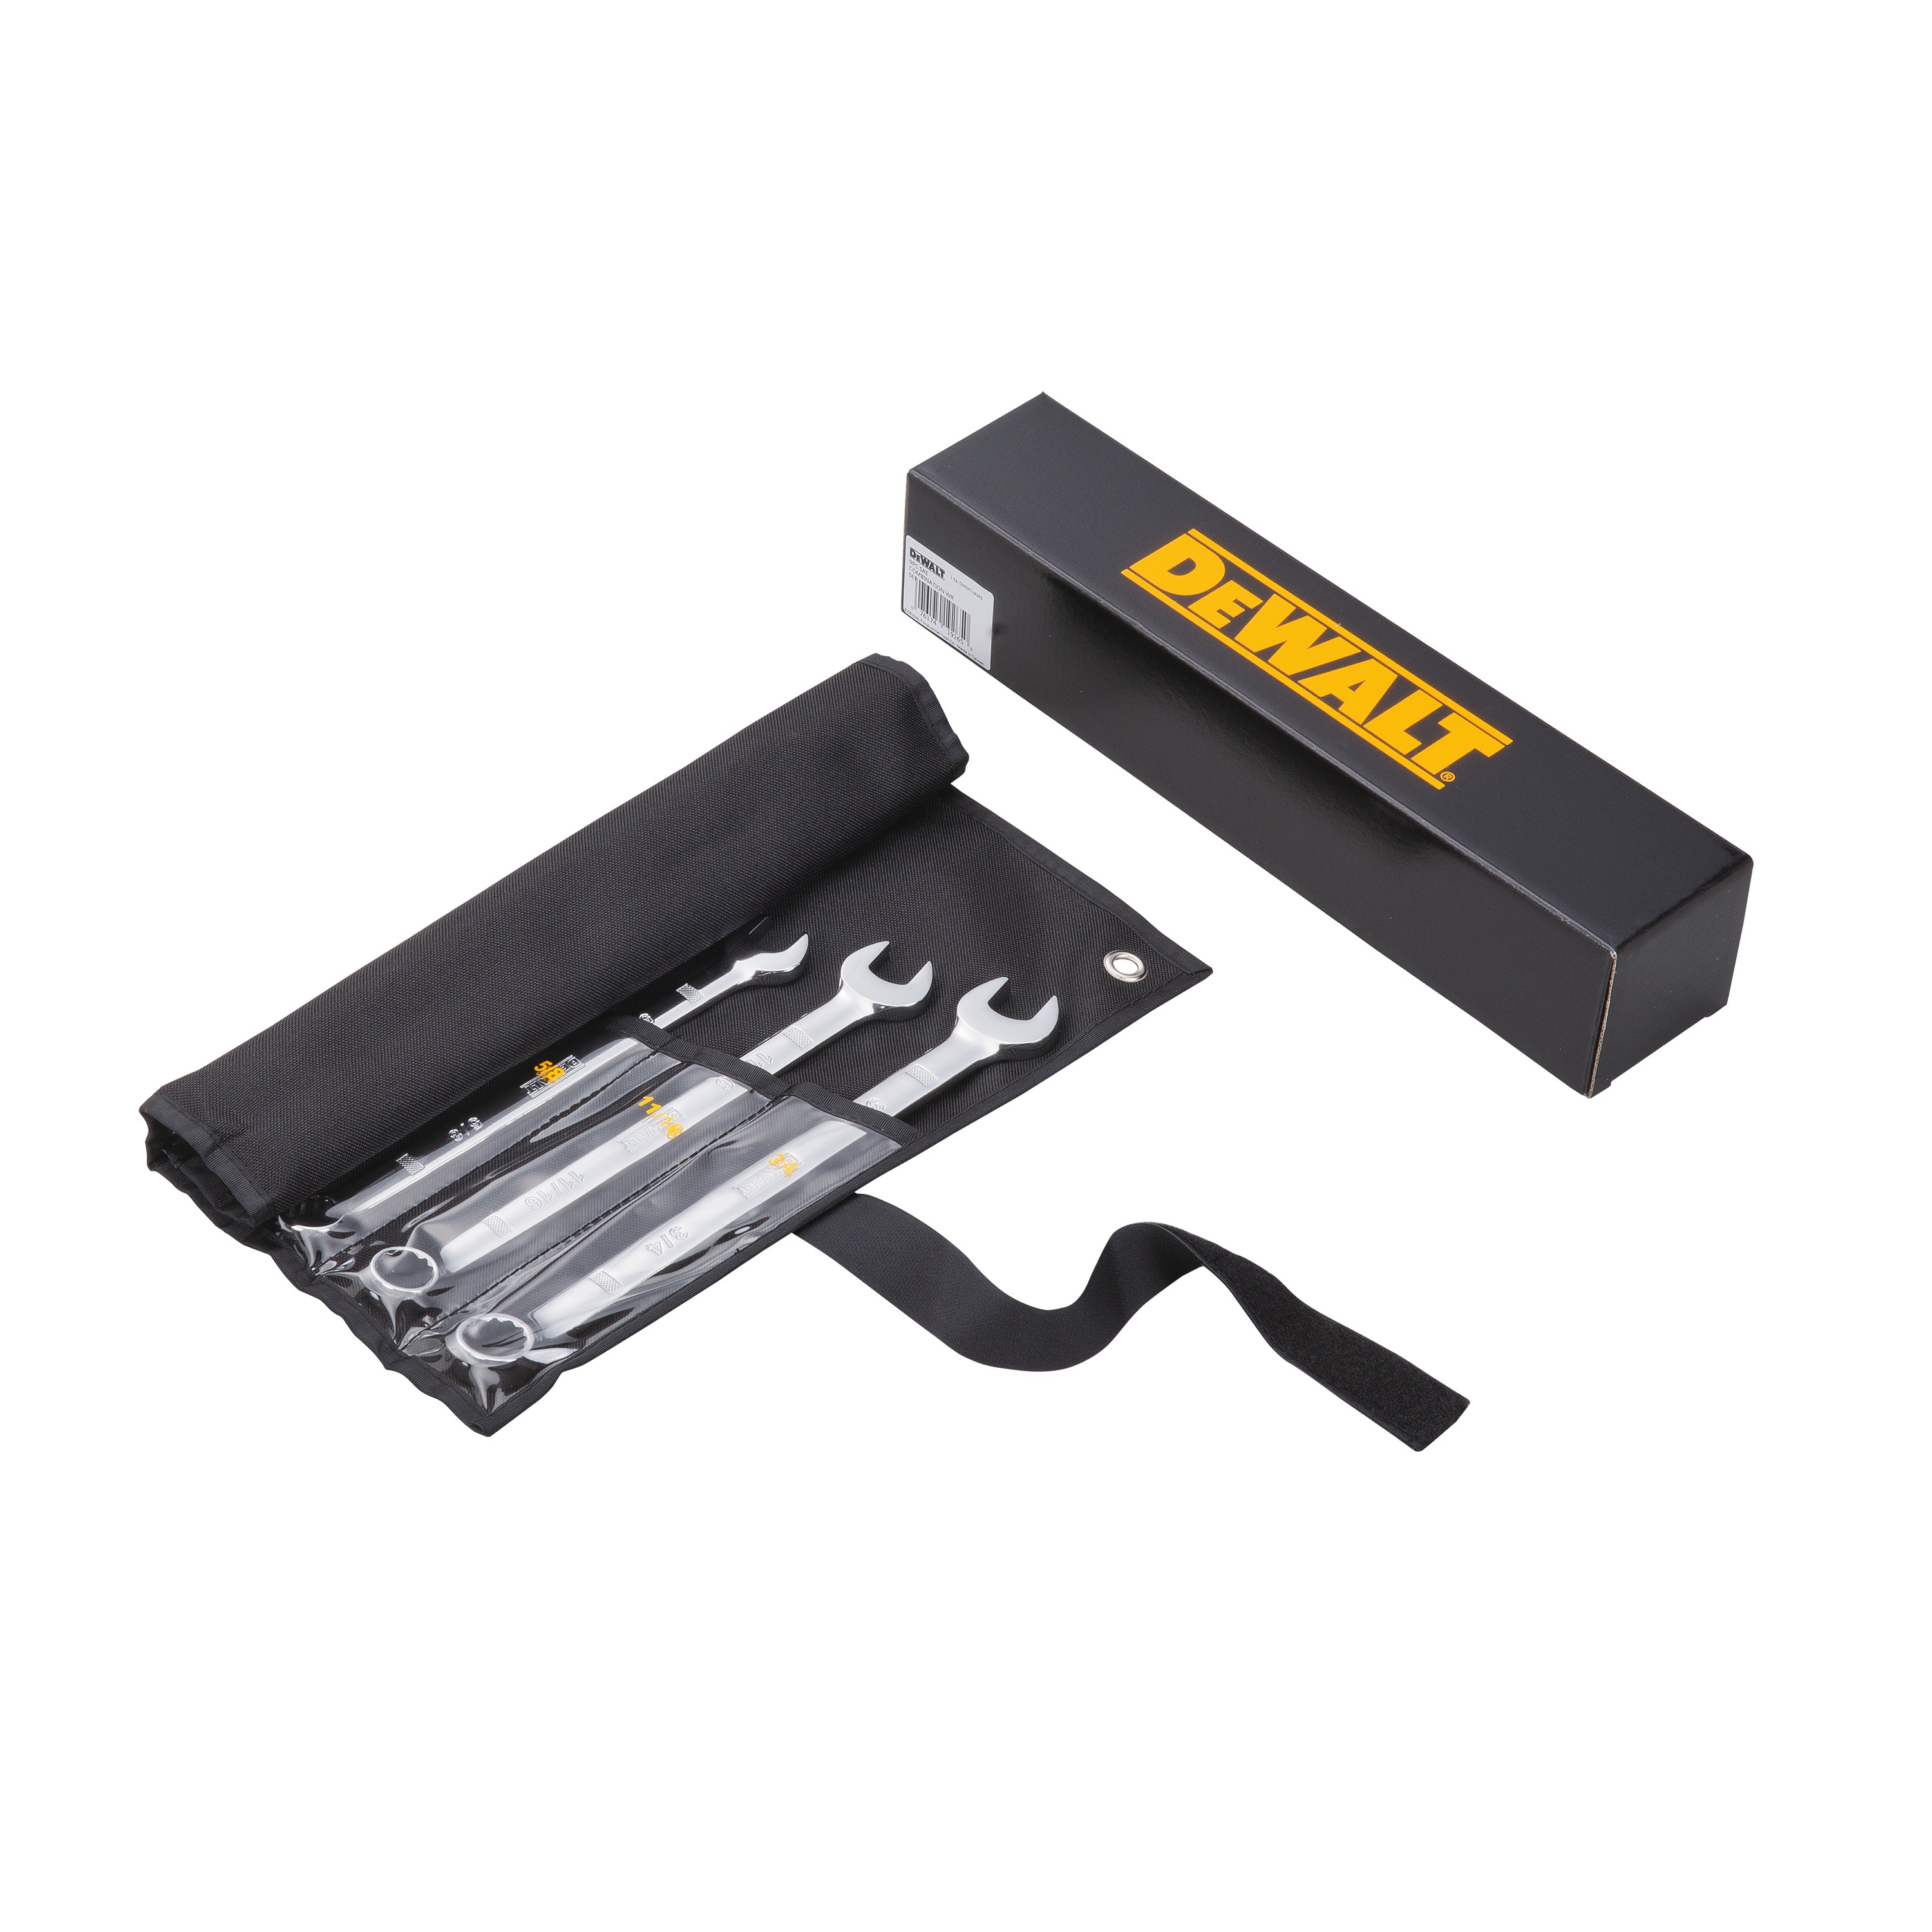 DEWALT 9 piece combination wrench set with its case.